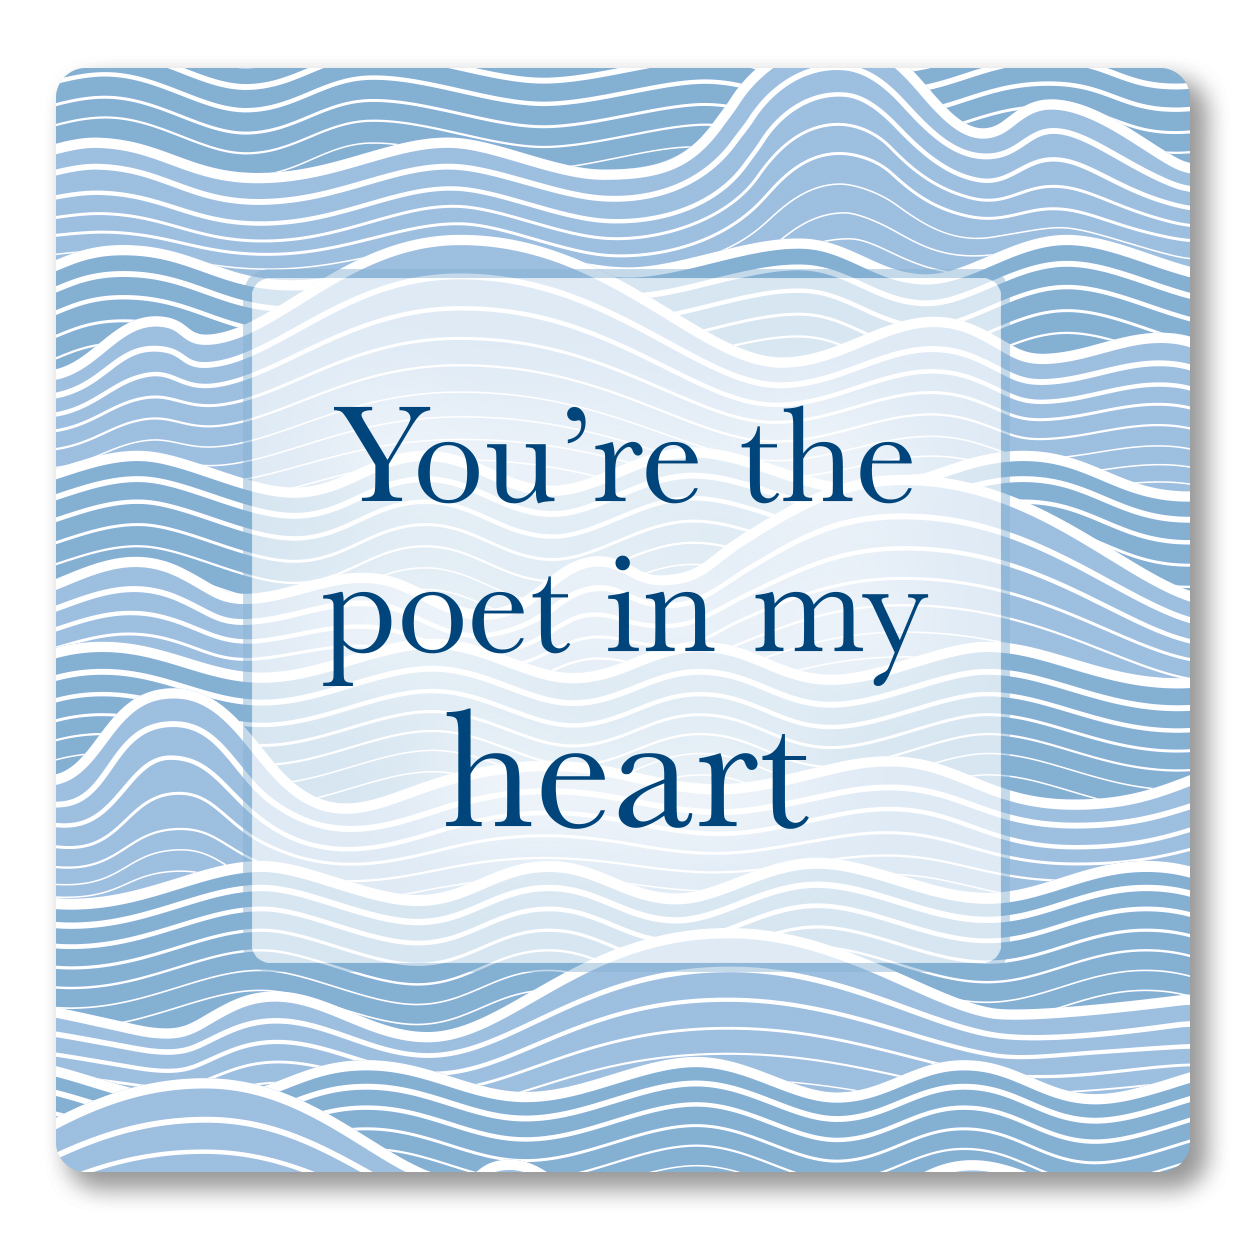 YOU'RE THE POET IN MY HEART - sent on September 20th, 2022